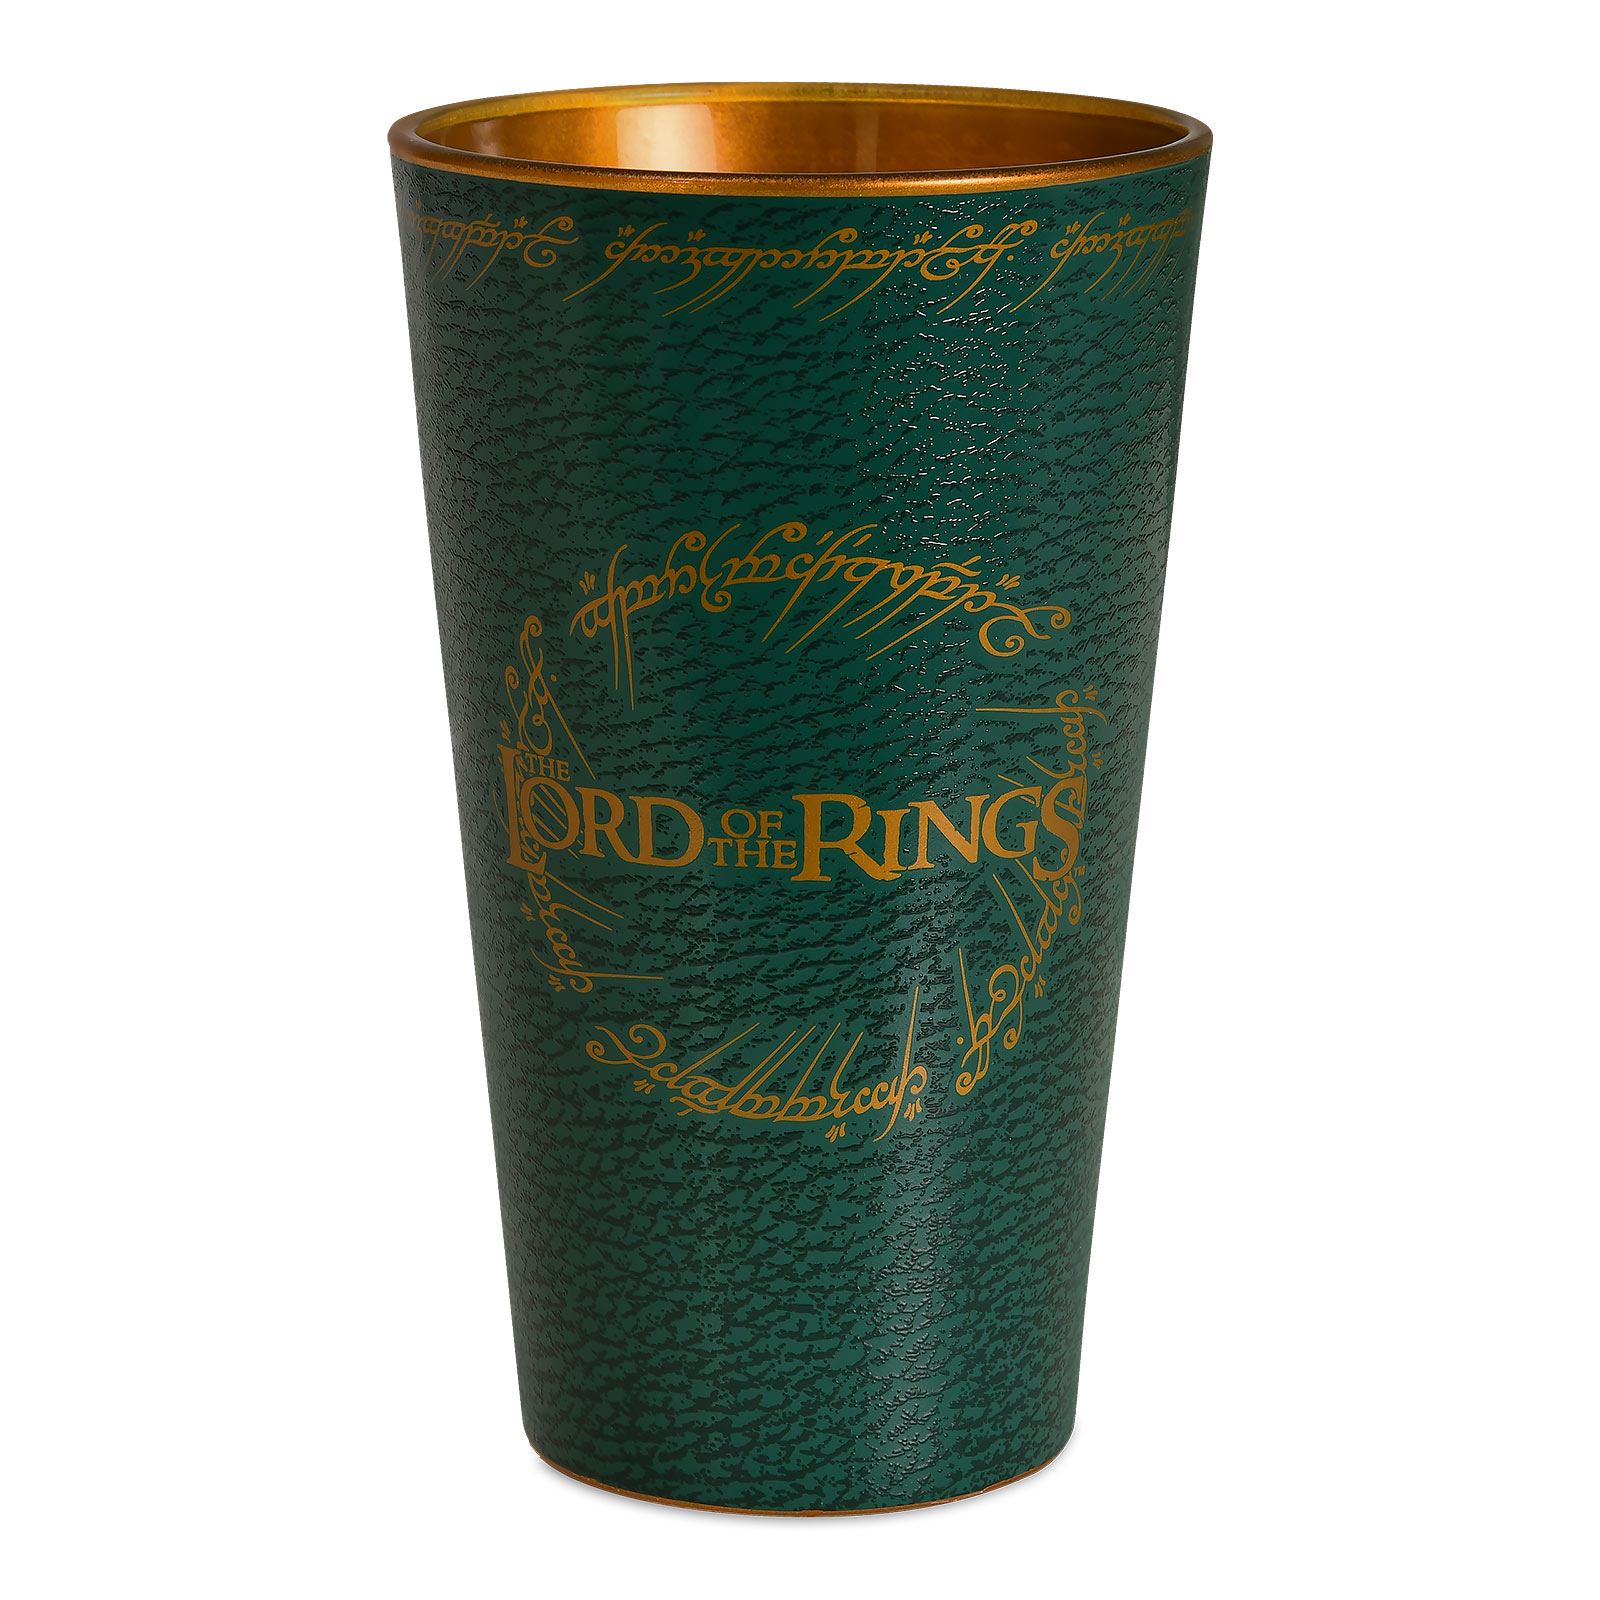 Lord of the Rings - The Prancing Pony Glass green